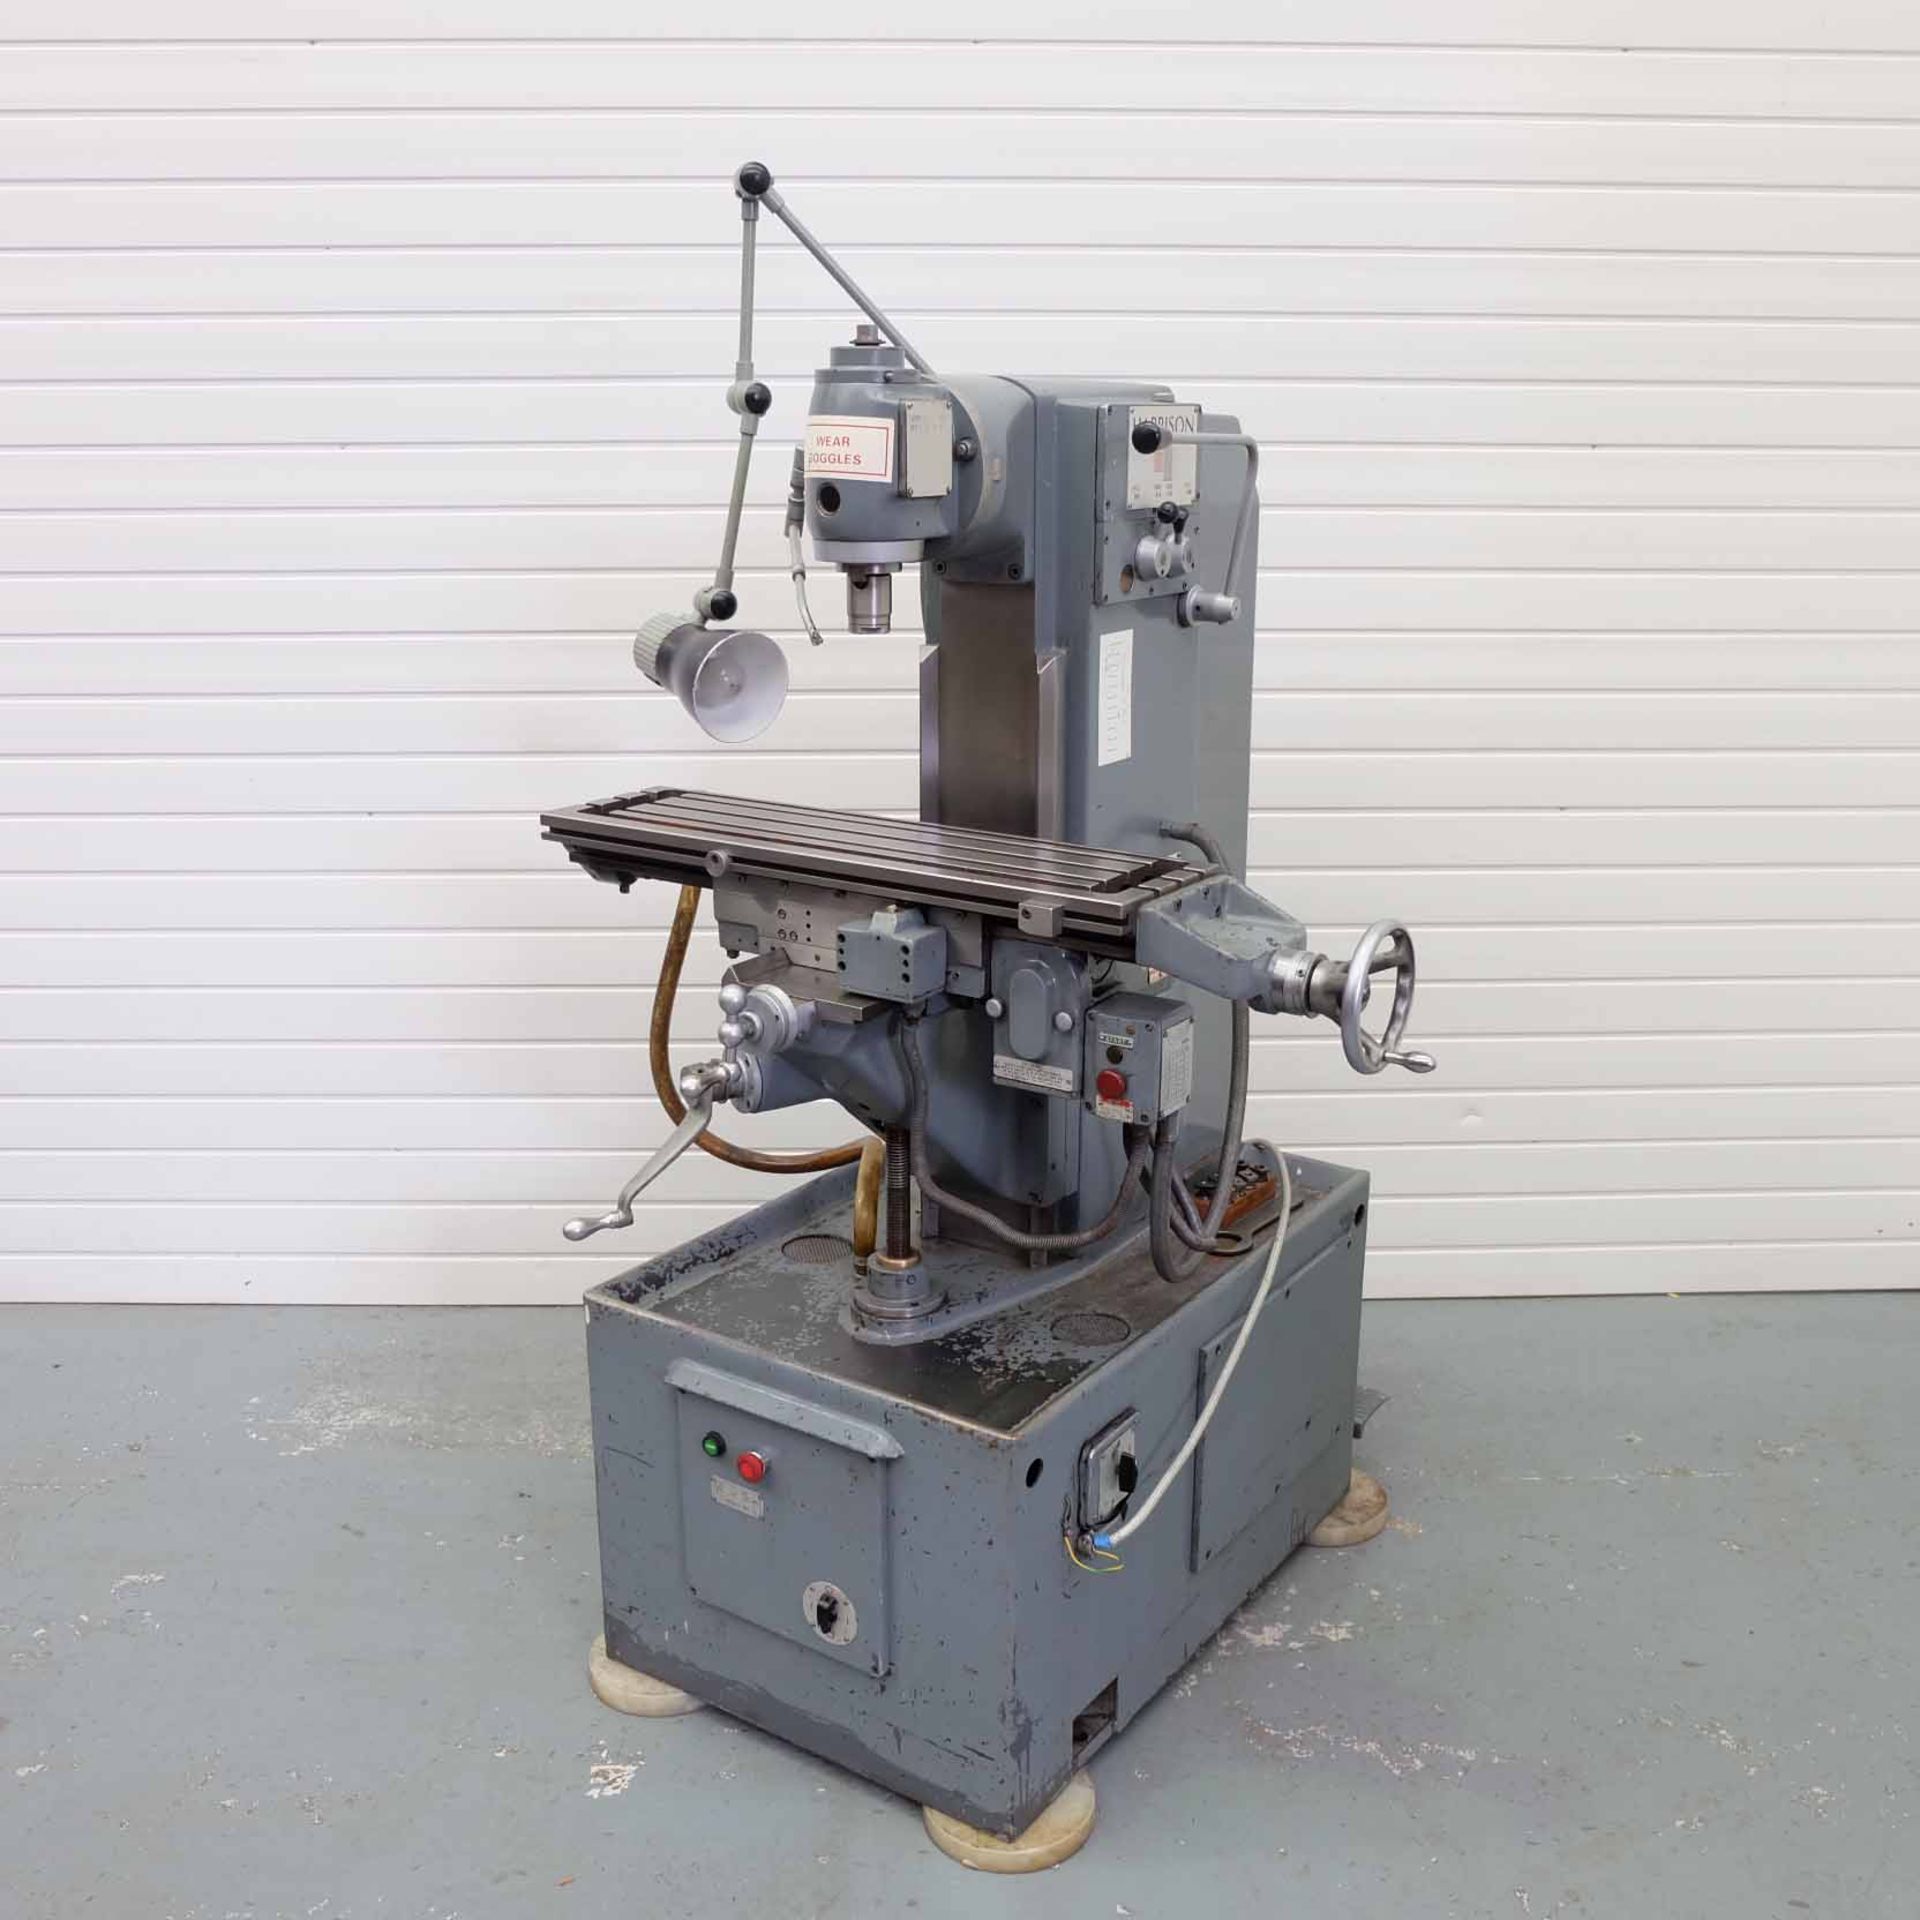 Harrison Vertical Milling Machine With Swivelling Head. Table Size 775mm x 200mm. Longitudinal Trave